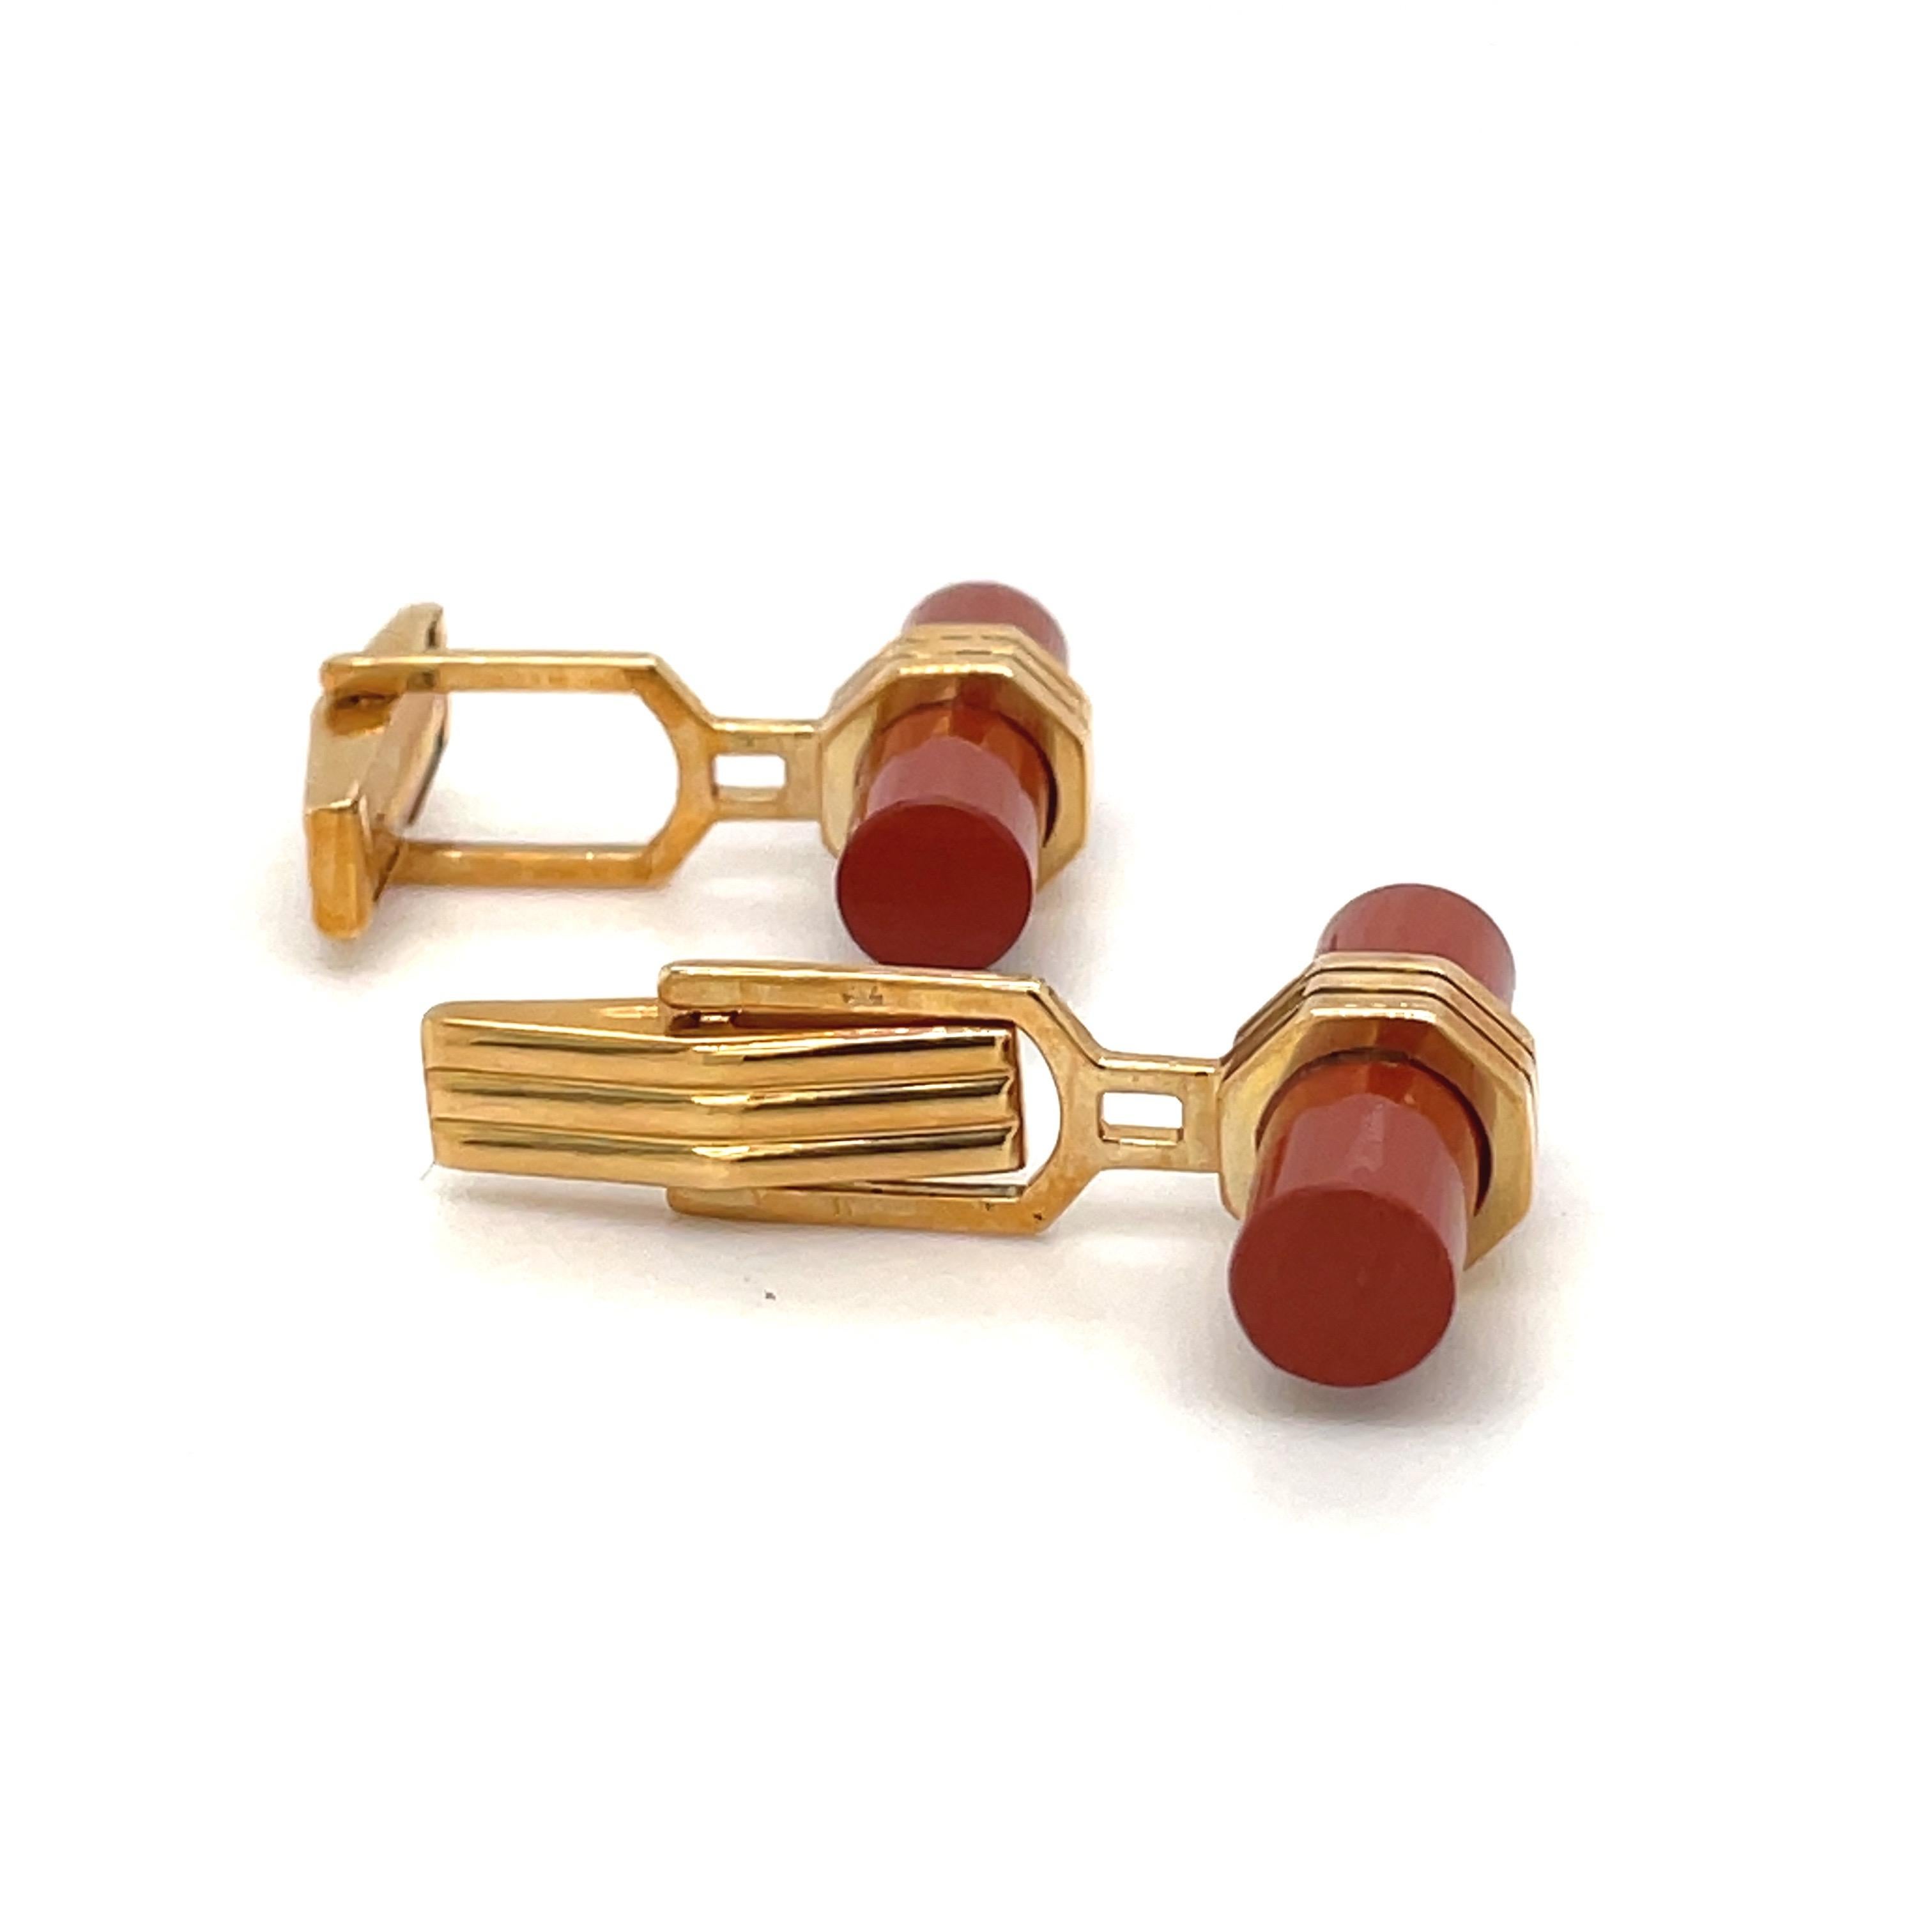 Classic 18KT yellow gold bar style cuff links. Three rings of gold hold a cylinder of natural jasper.
The cuff links have collapsible backs and are stamped  750.